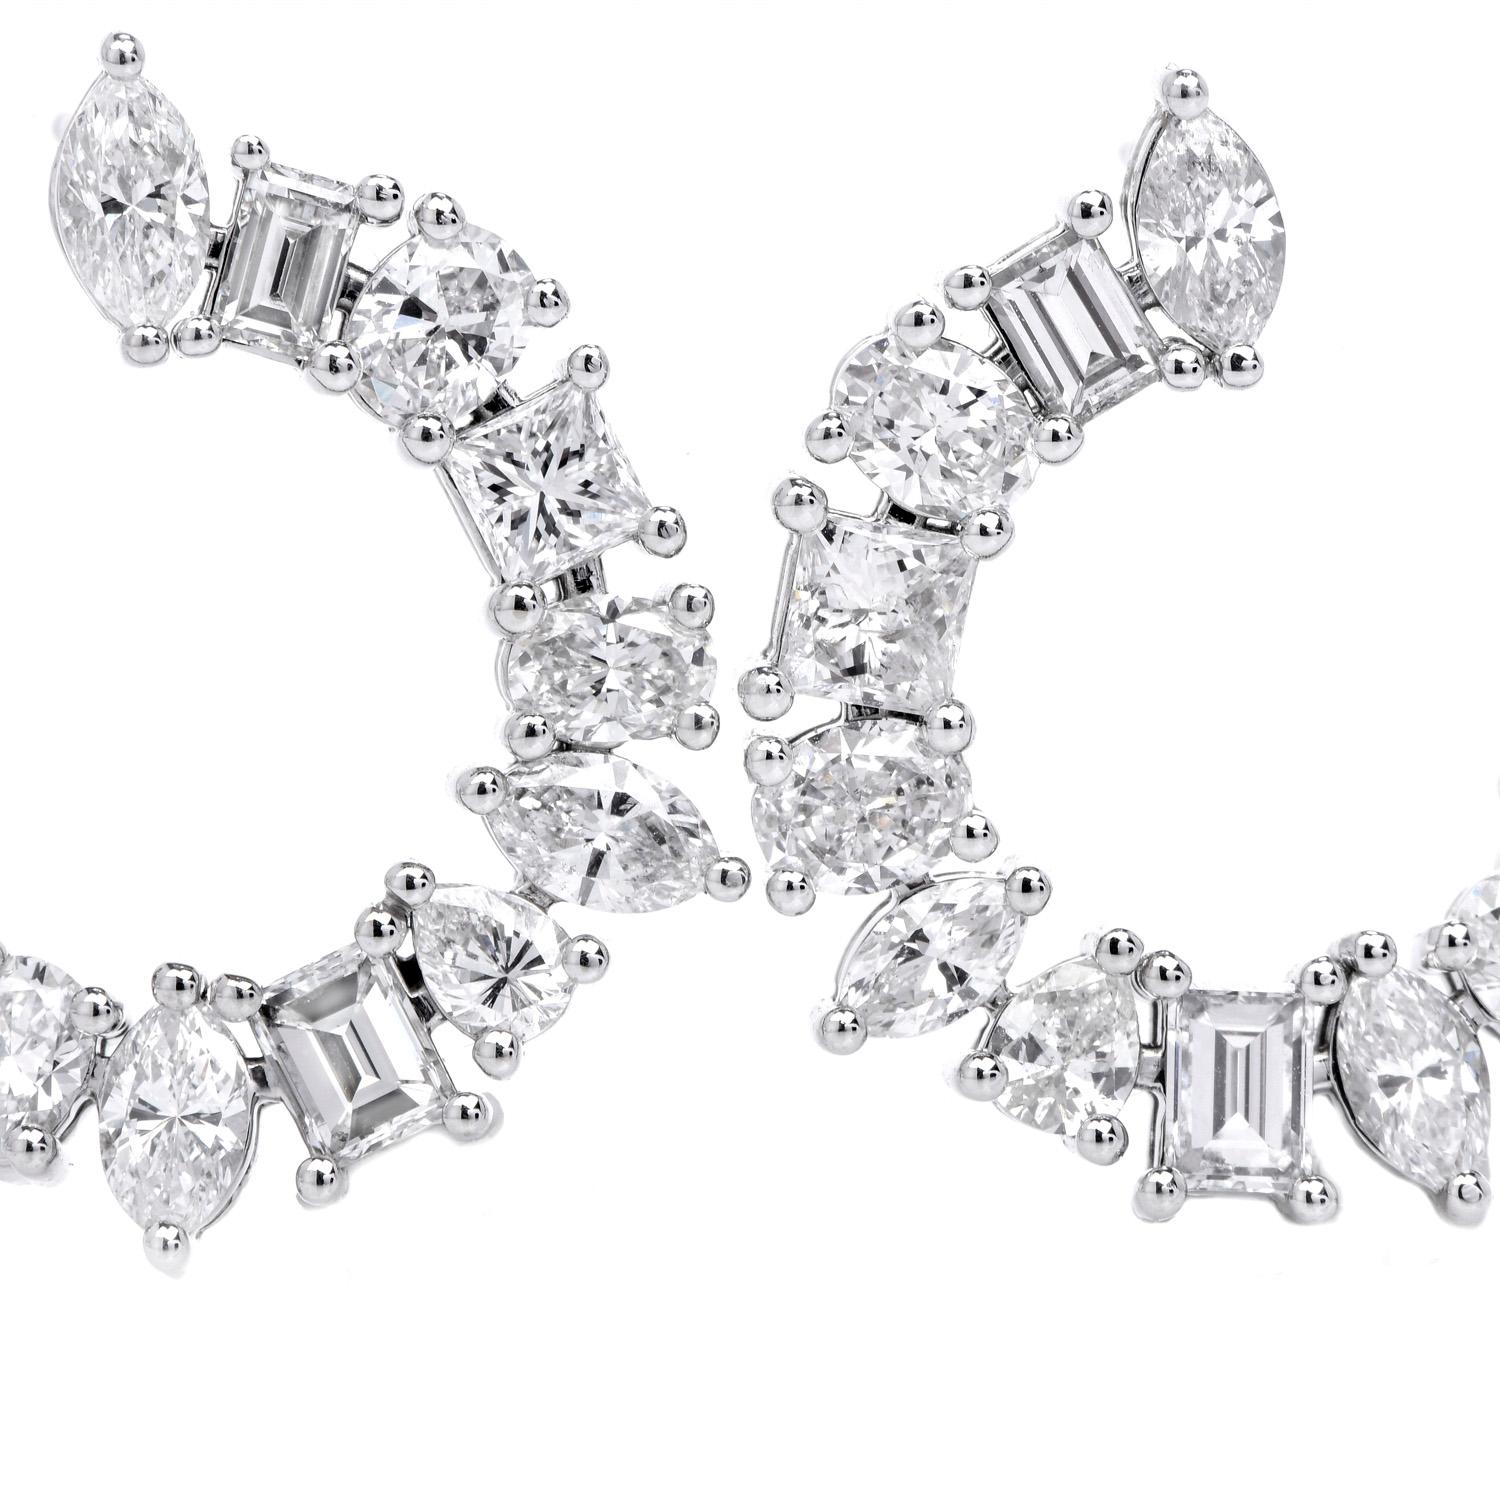 High-End Luxurious Hoop Earrings crafted in solid Platinum!

These pieces are a parade of (26) Genuine Natural Diamonds, Prong Set, cut in Oval, Pear, Round, Baguette, Princess and Marquise cut, weighing 4.46 carats in total (G-H color, VS